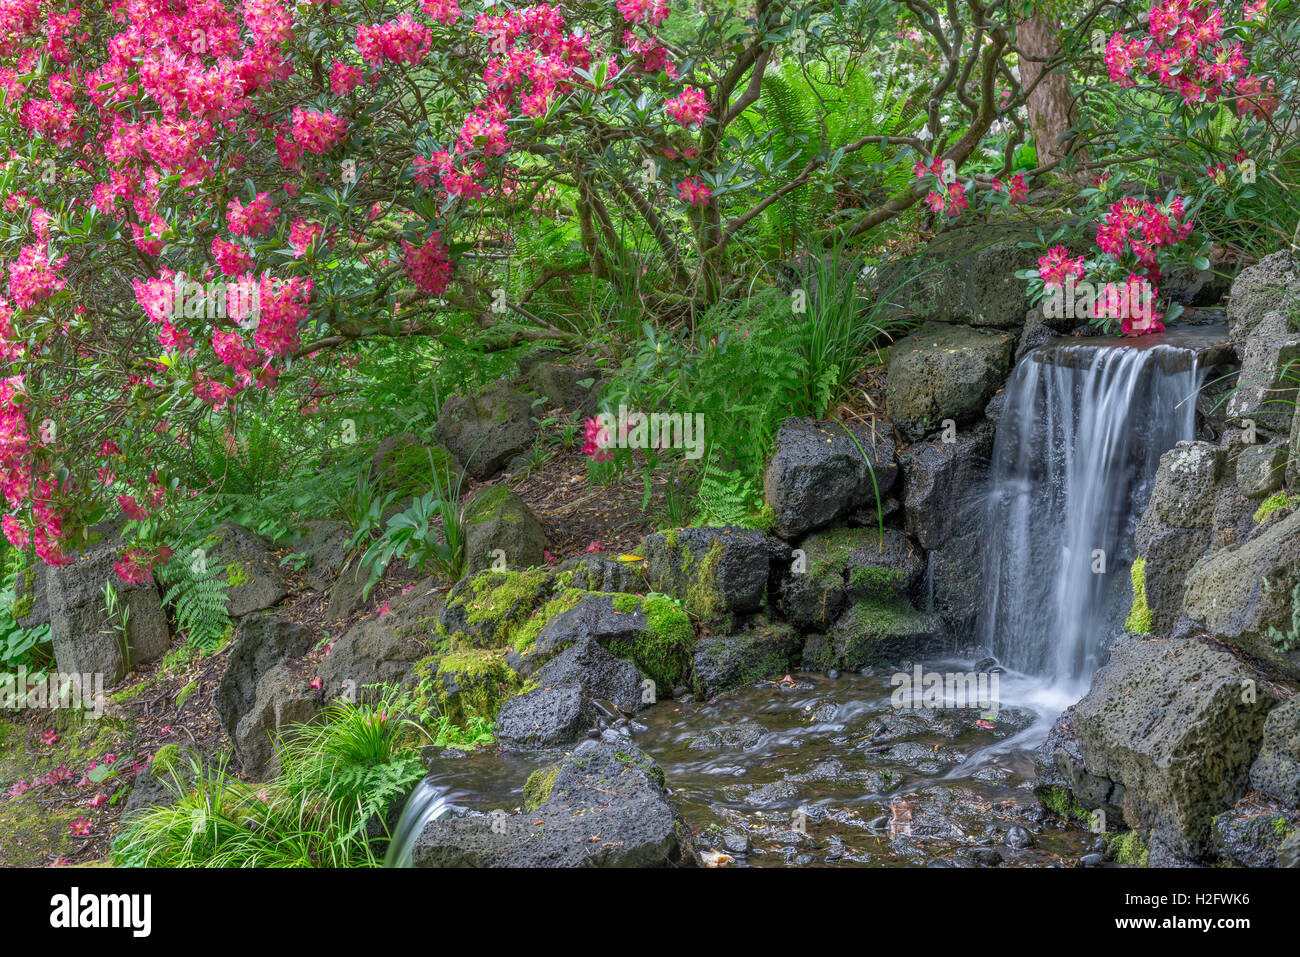 USA, Oregon, Portland, Crystal Springs Rhododendron Garden, Light red blossoms of rhododendrons in bloom alongside waterfall. Stock Photo